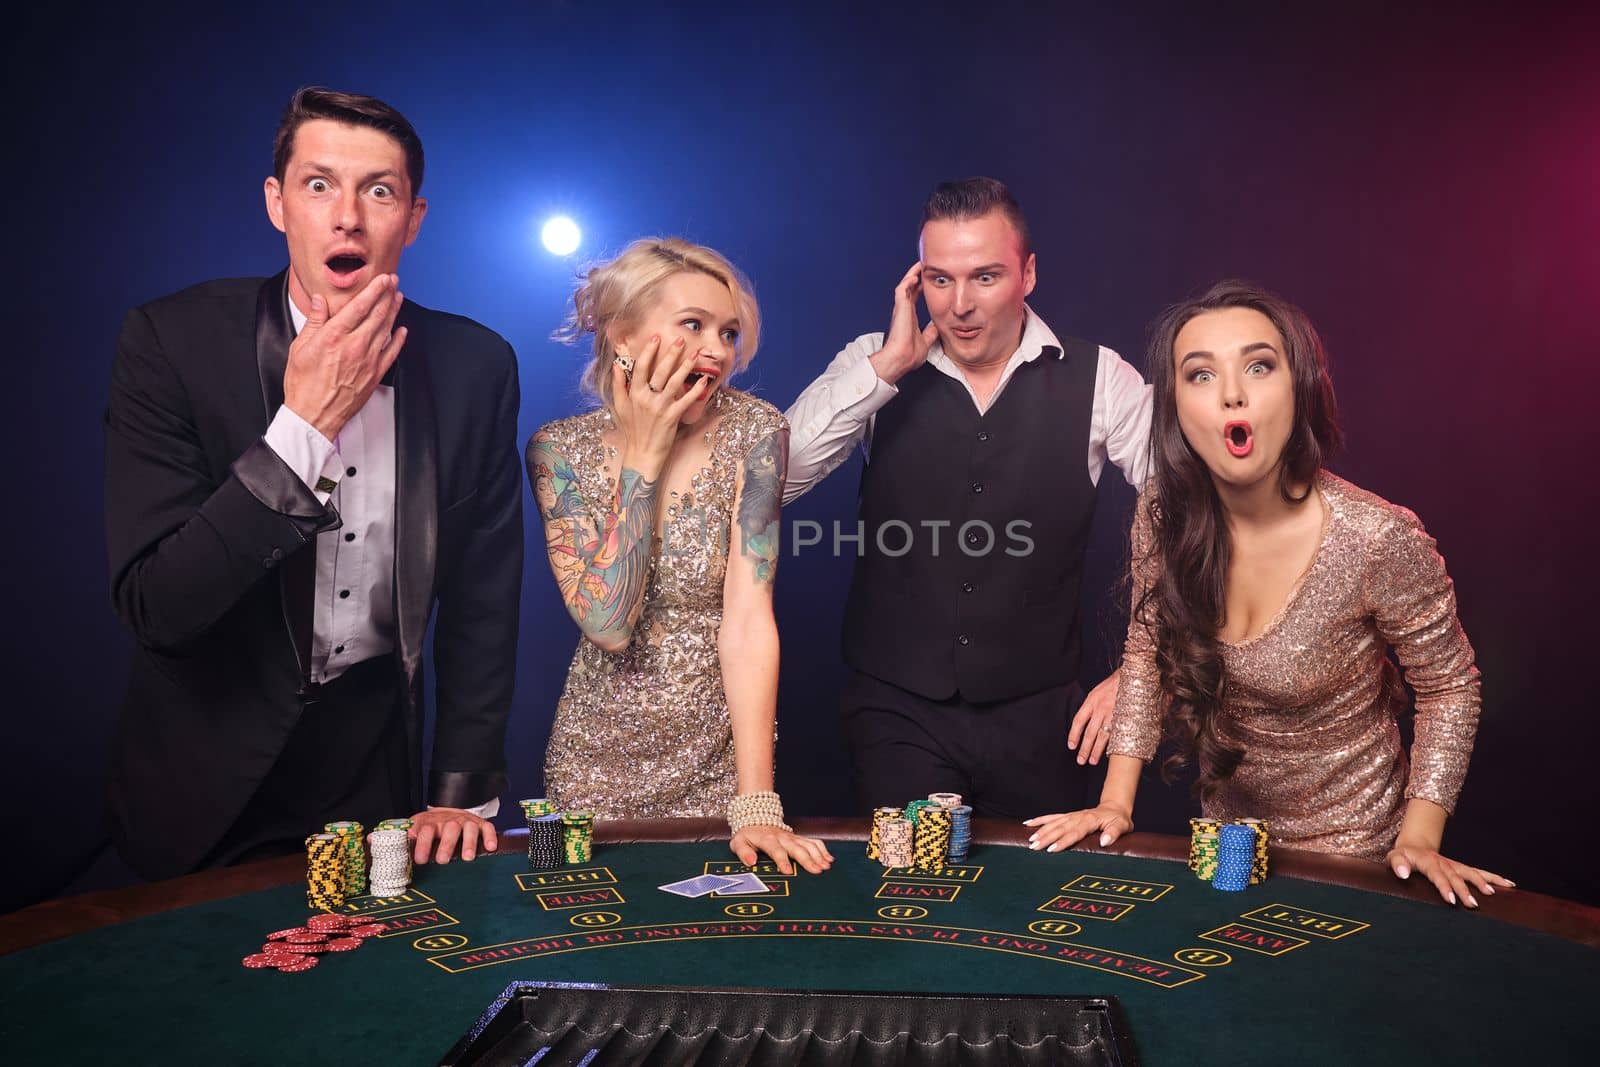 Group of a wondered rich friends are playing poker at casino. Youth are making bets waiting for a big win. They are looking at the camera standing at the table against a red and blue backlights on black background. Risky gambling entertainment.